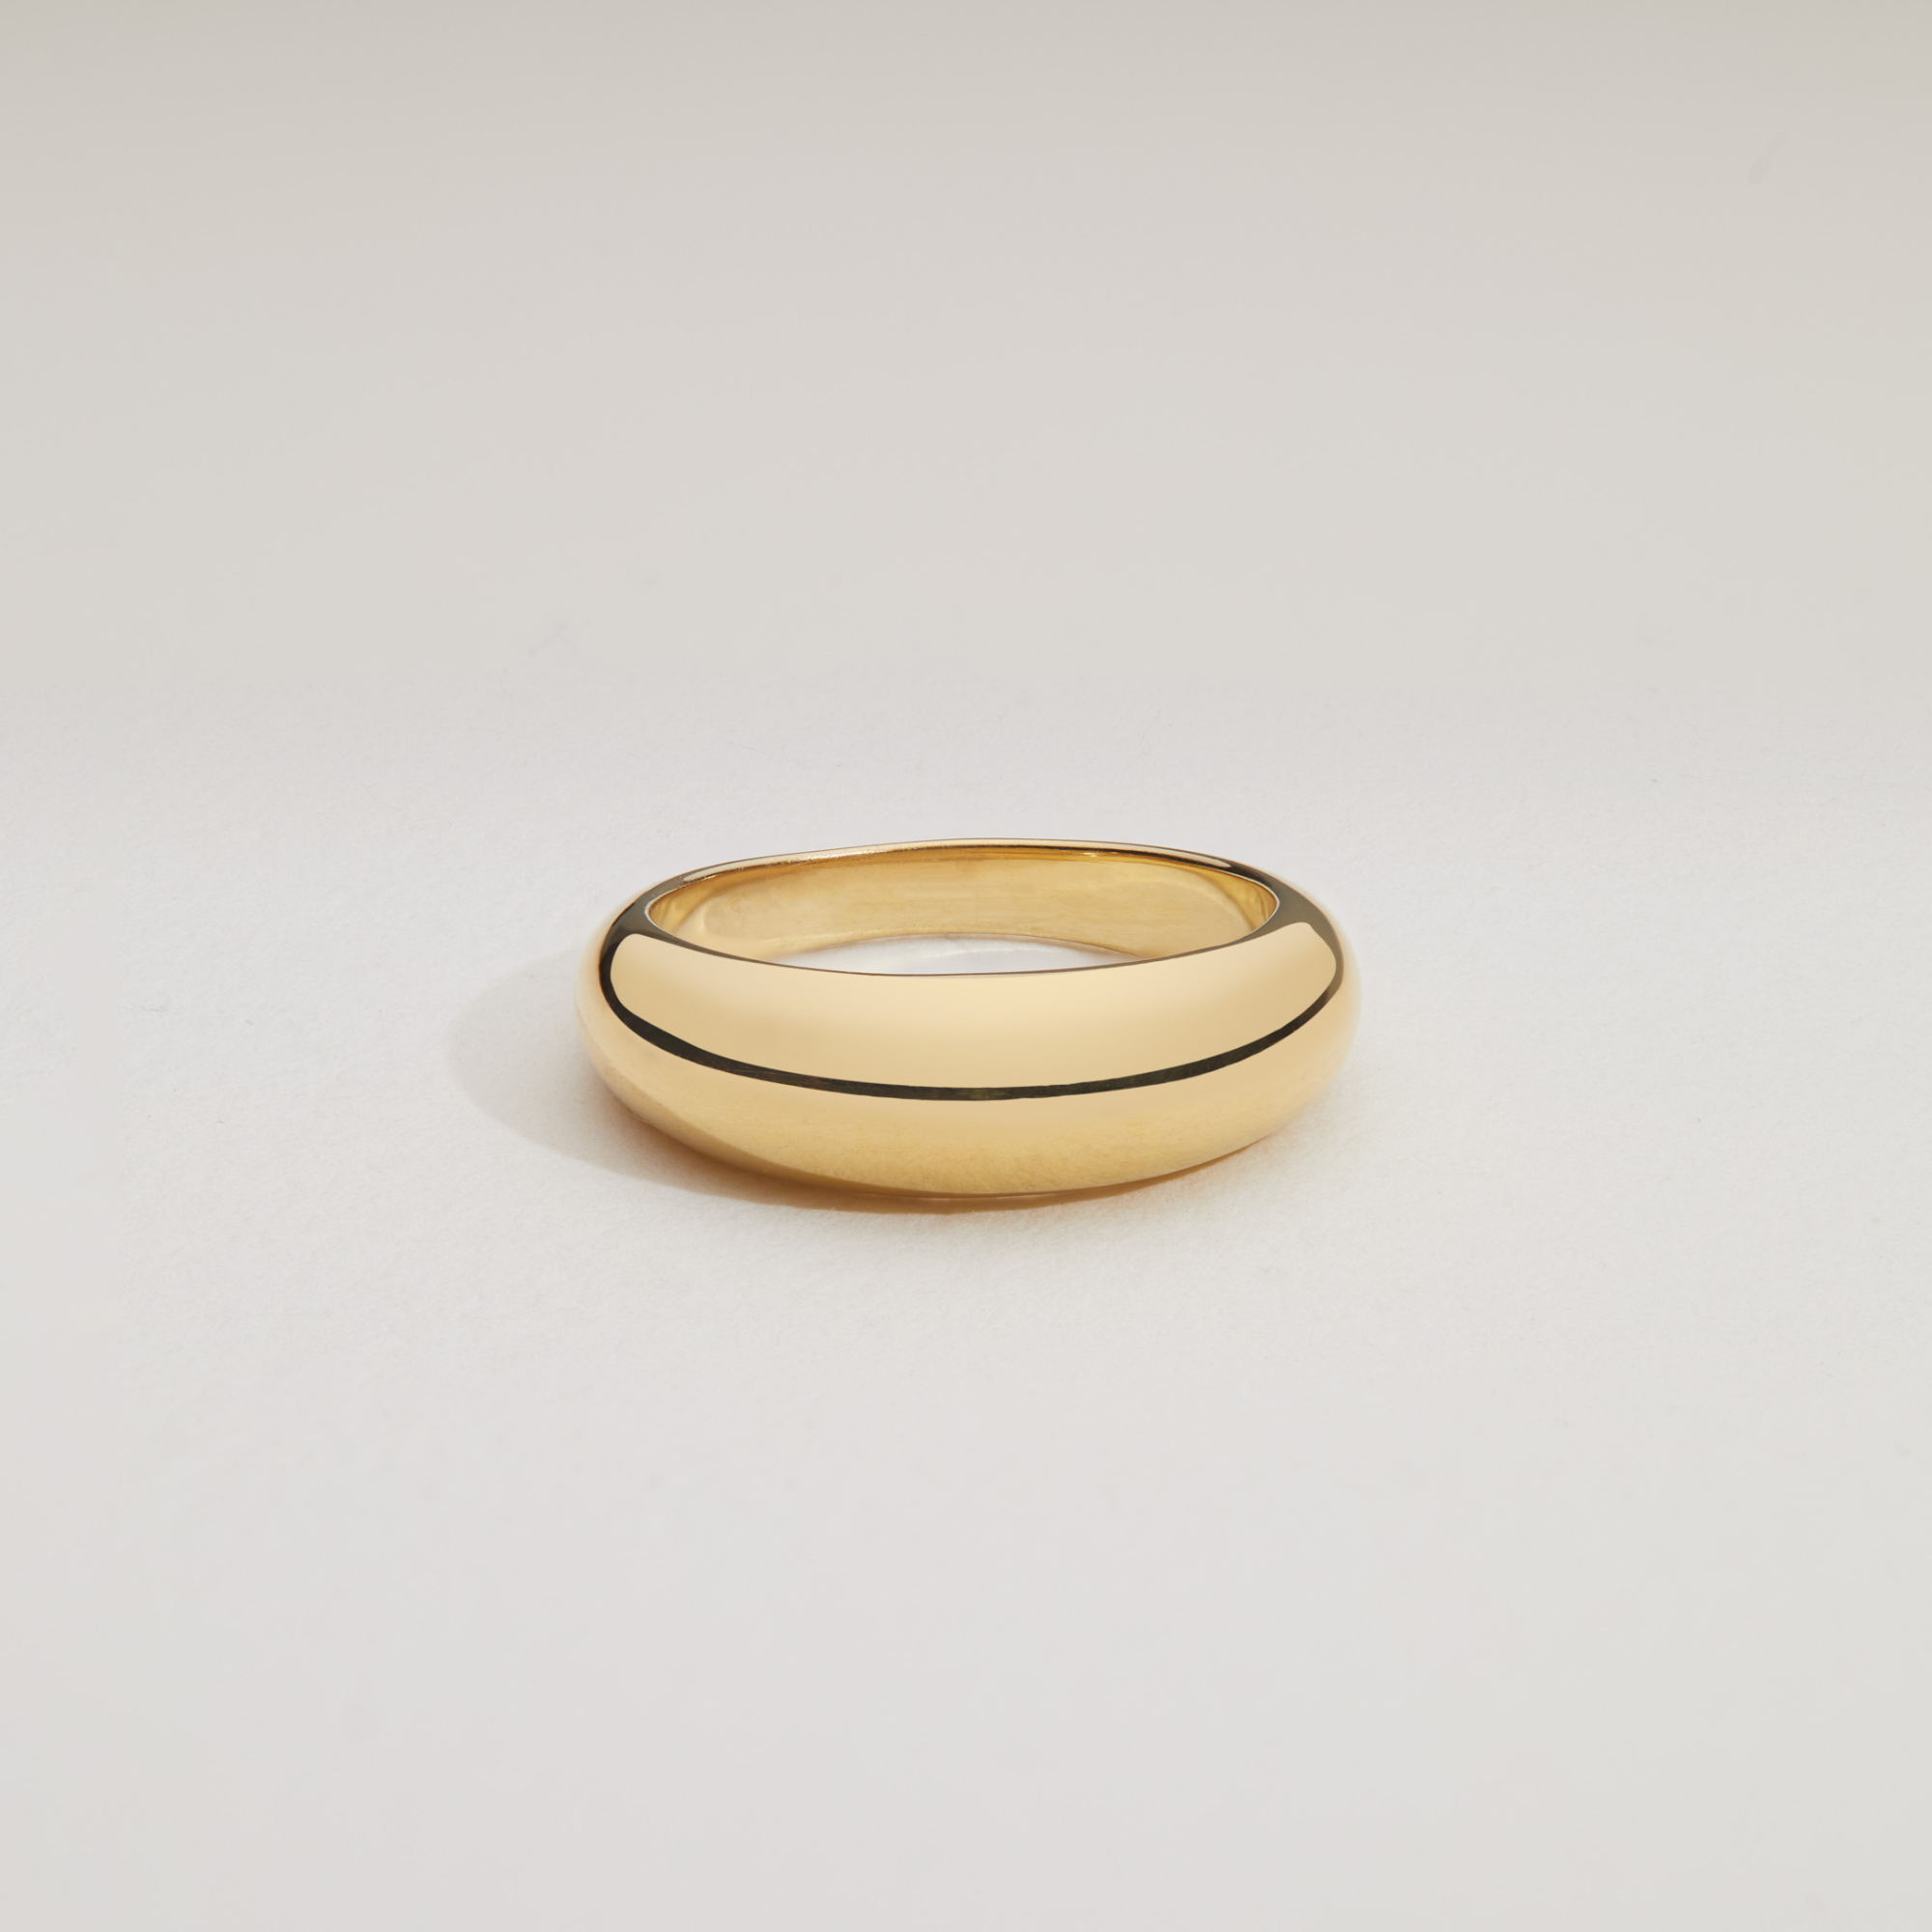 Gold plain dome ring on a white surface